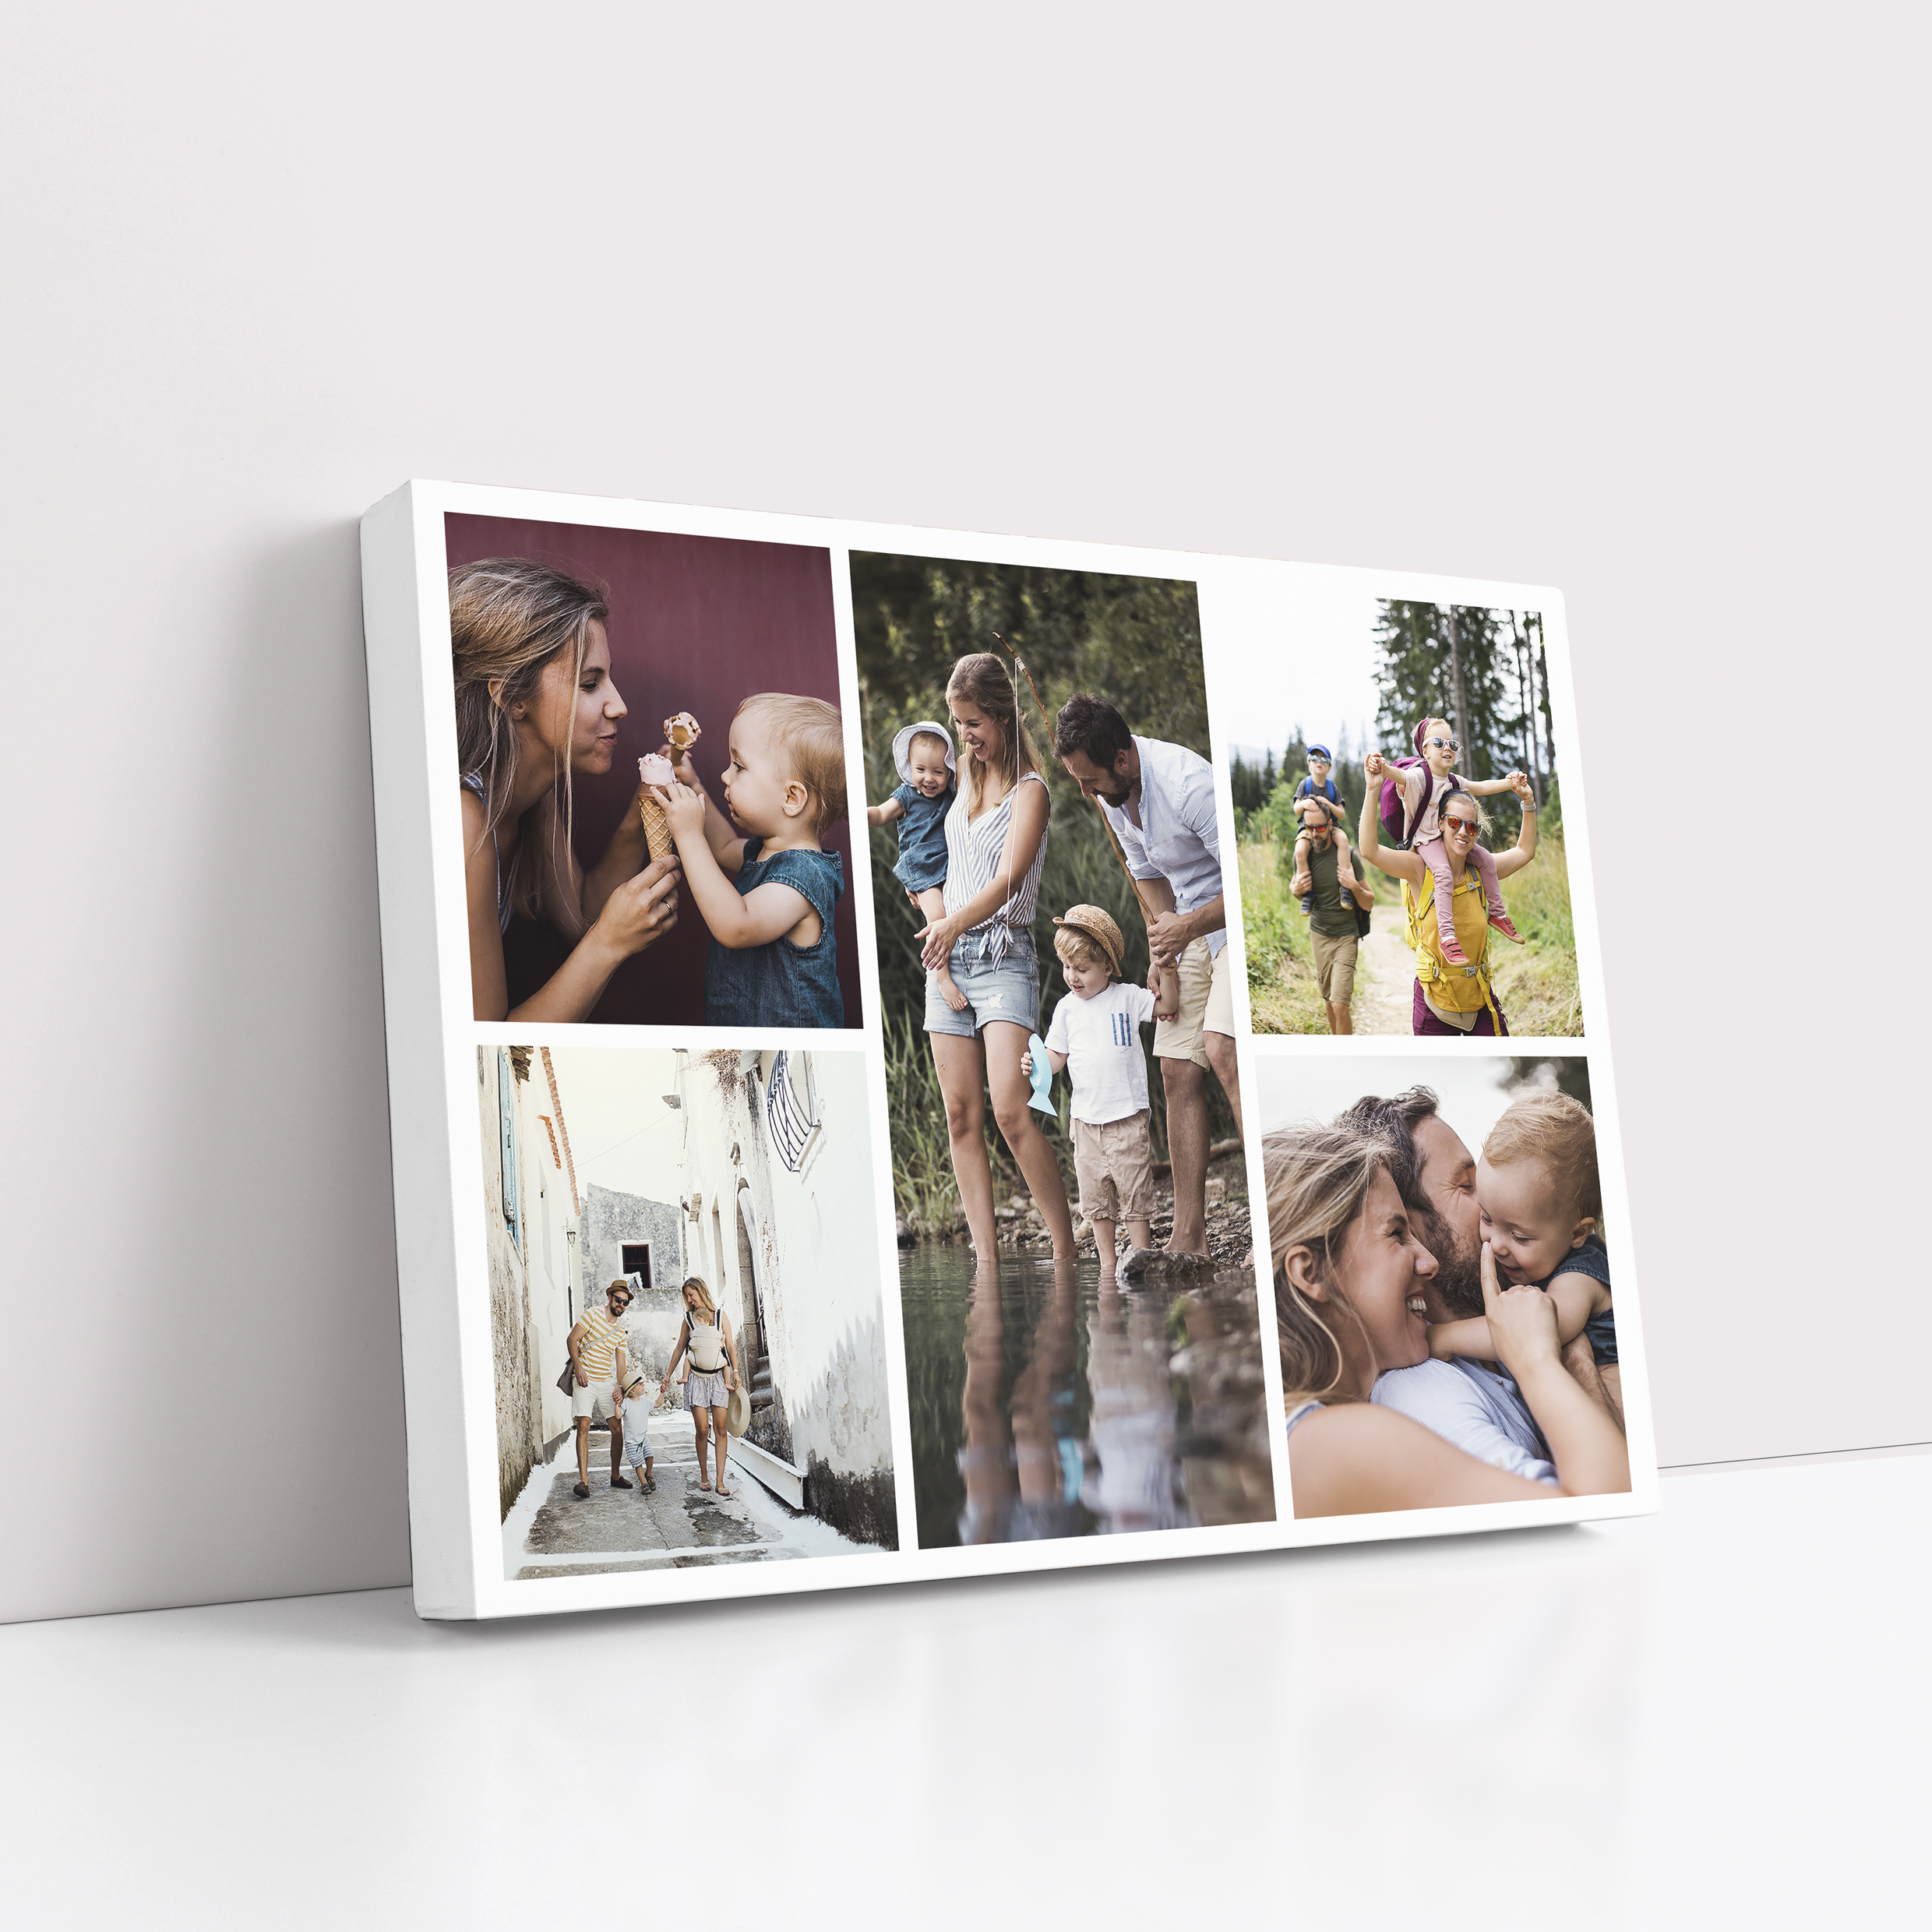 Fivefold Memories Personalised Stretch Canvas Print - Immerse yourself in cherished memories with this versatile canvas showcasing five treasured moments.